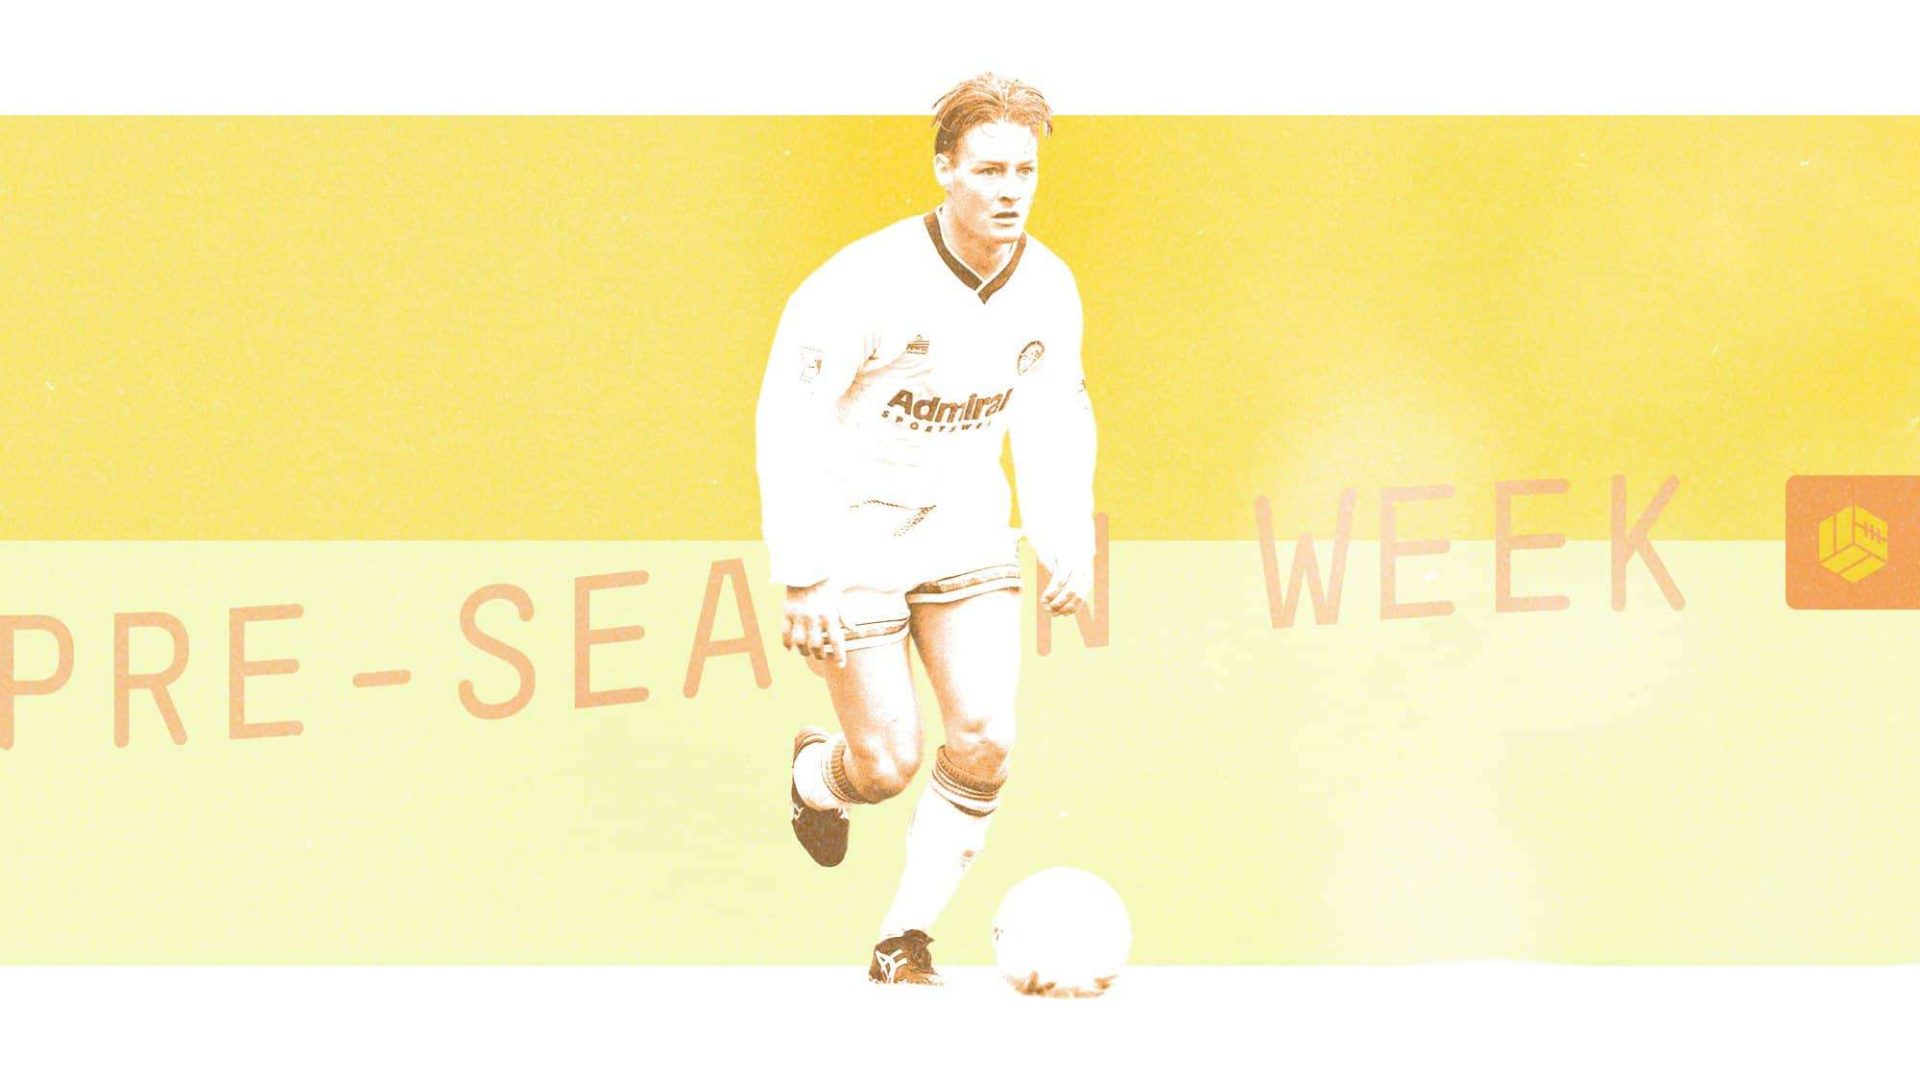 David Batty in Leeds' 92/93 home kit, running with the ball